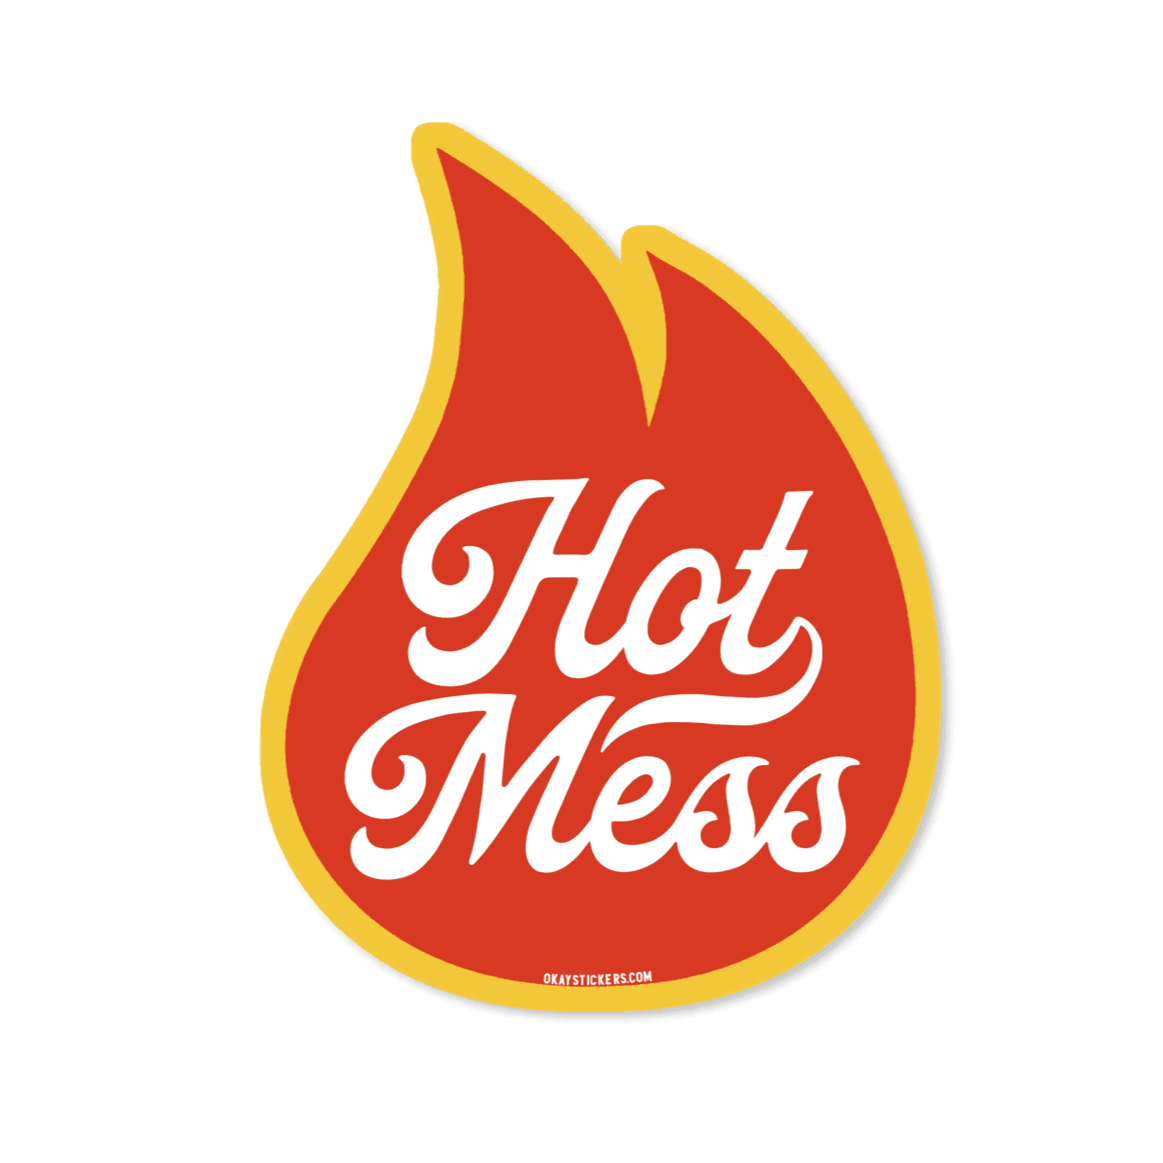 Running 15 minutes late and wheels are screeching...we know who you are!  Our "Hot Mess" decal with flames is perfect to let people know what you're all about!  Or give to that friend that is a self proclaimed Hot Mess; she'll appreciate you thinking of her.  ;) High quality vinyl decal Approximate size is 3 x 2.75 (inches)